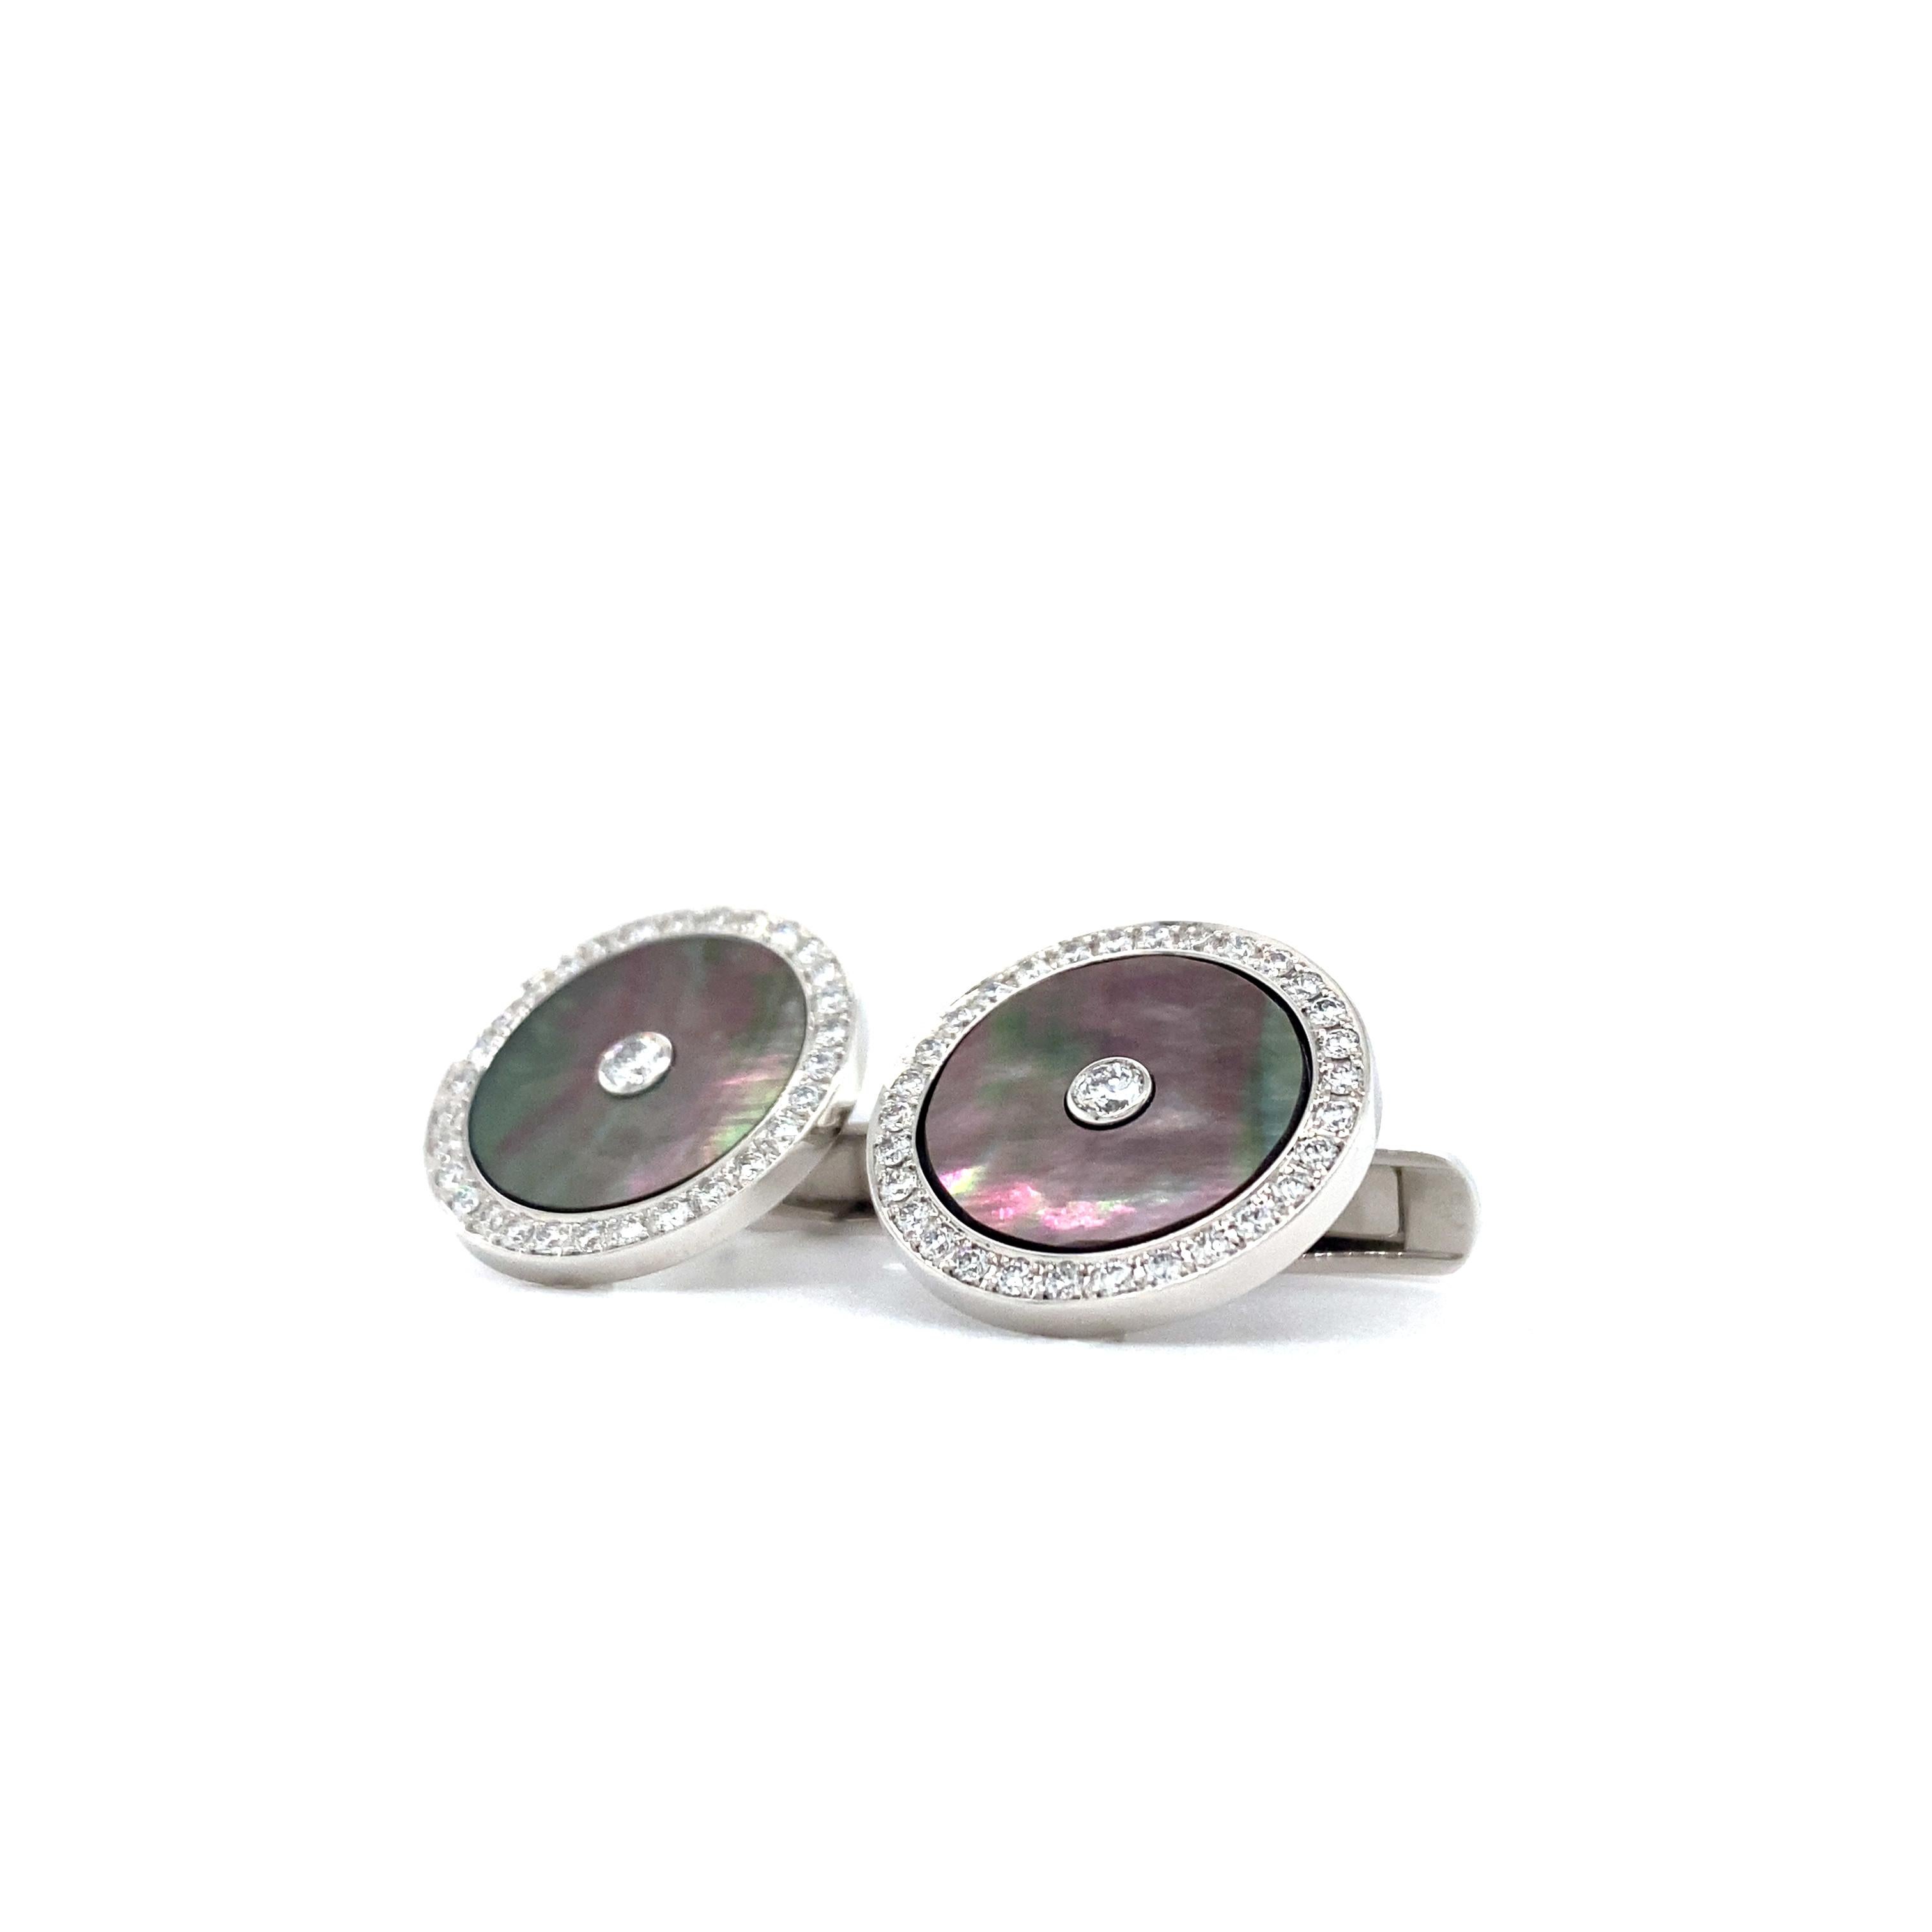 Women's or Men's Round Cufflinks - 18k White Gold - 62 Diamonds 0.72 ct Black Mother of Pearl For Sale